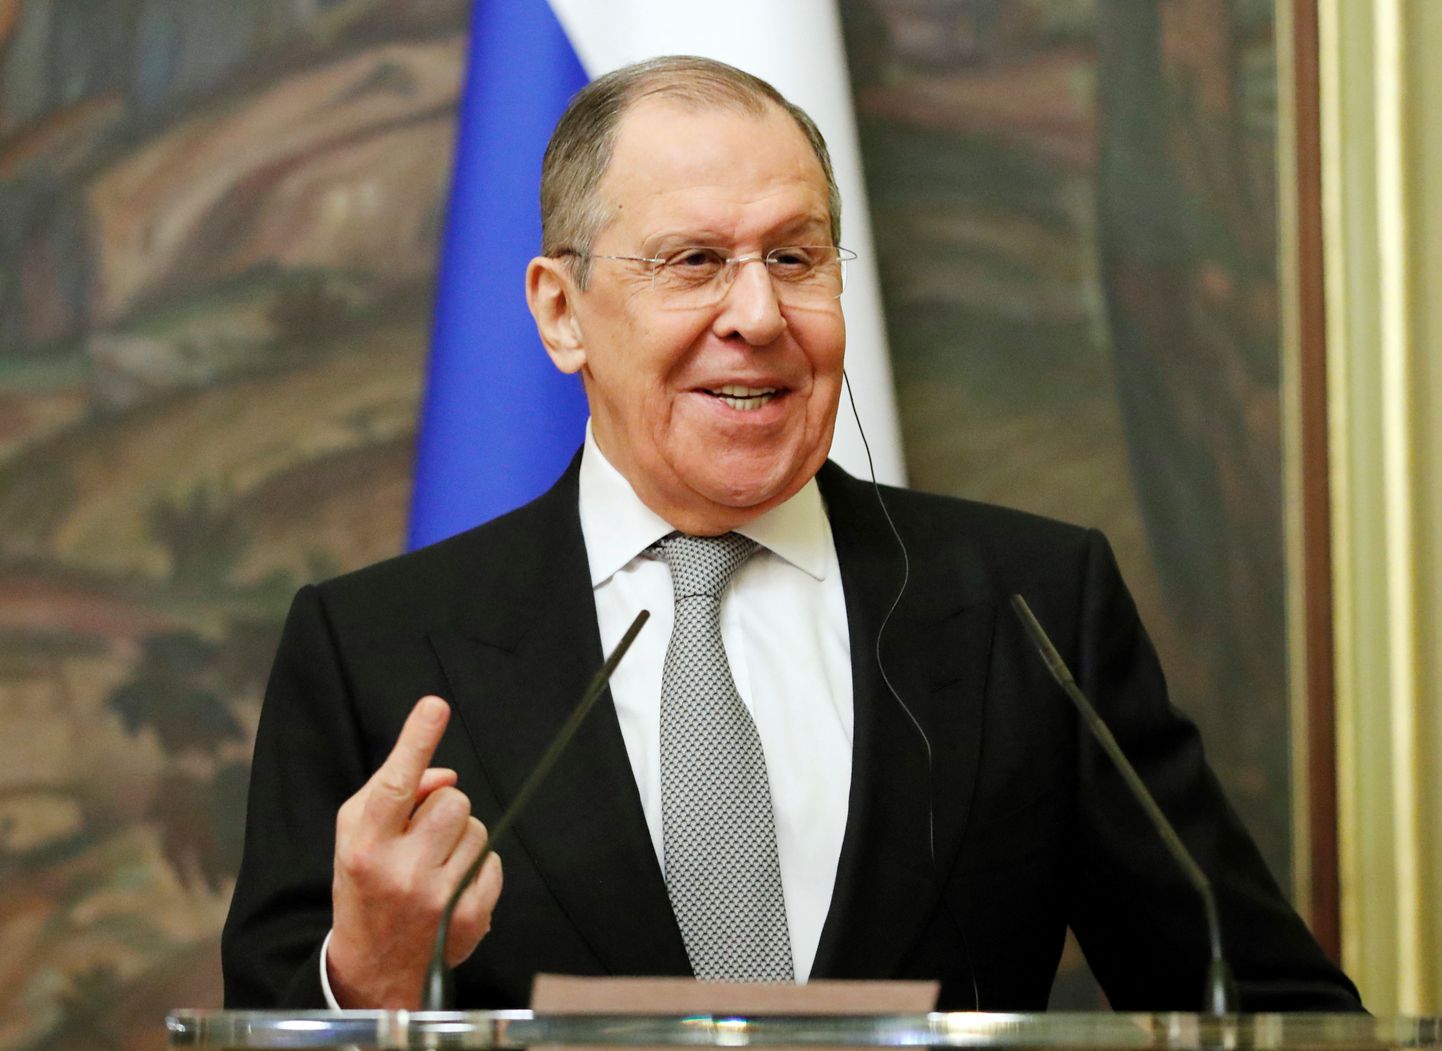 The foreign affairs ministers of the three Baltic states announced in a joint statement that they will boycott the upcoming Ministerial Council of the Organization for Security and Co-operation in Europe (OSCE) in Skopje, should Russian Foreign Minister Sergei Lavrov participate.